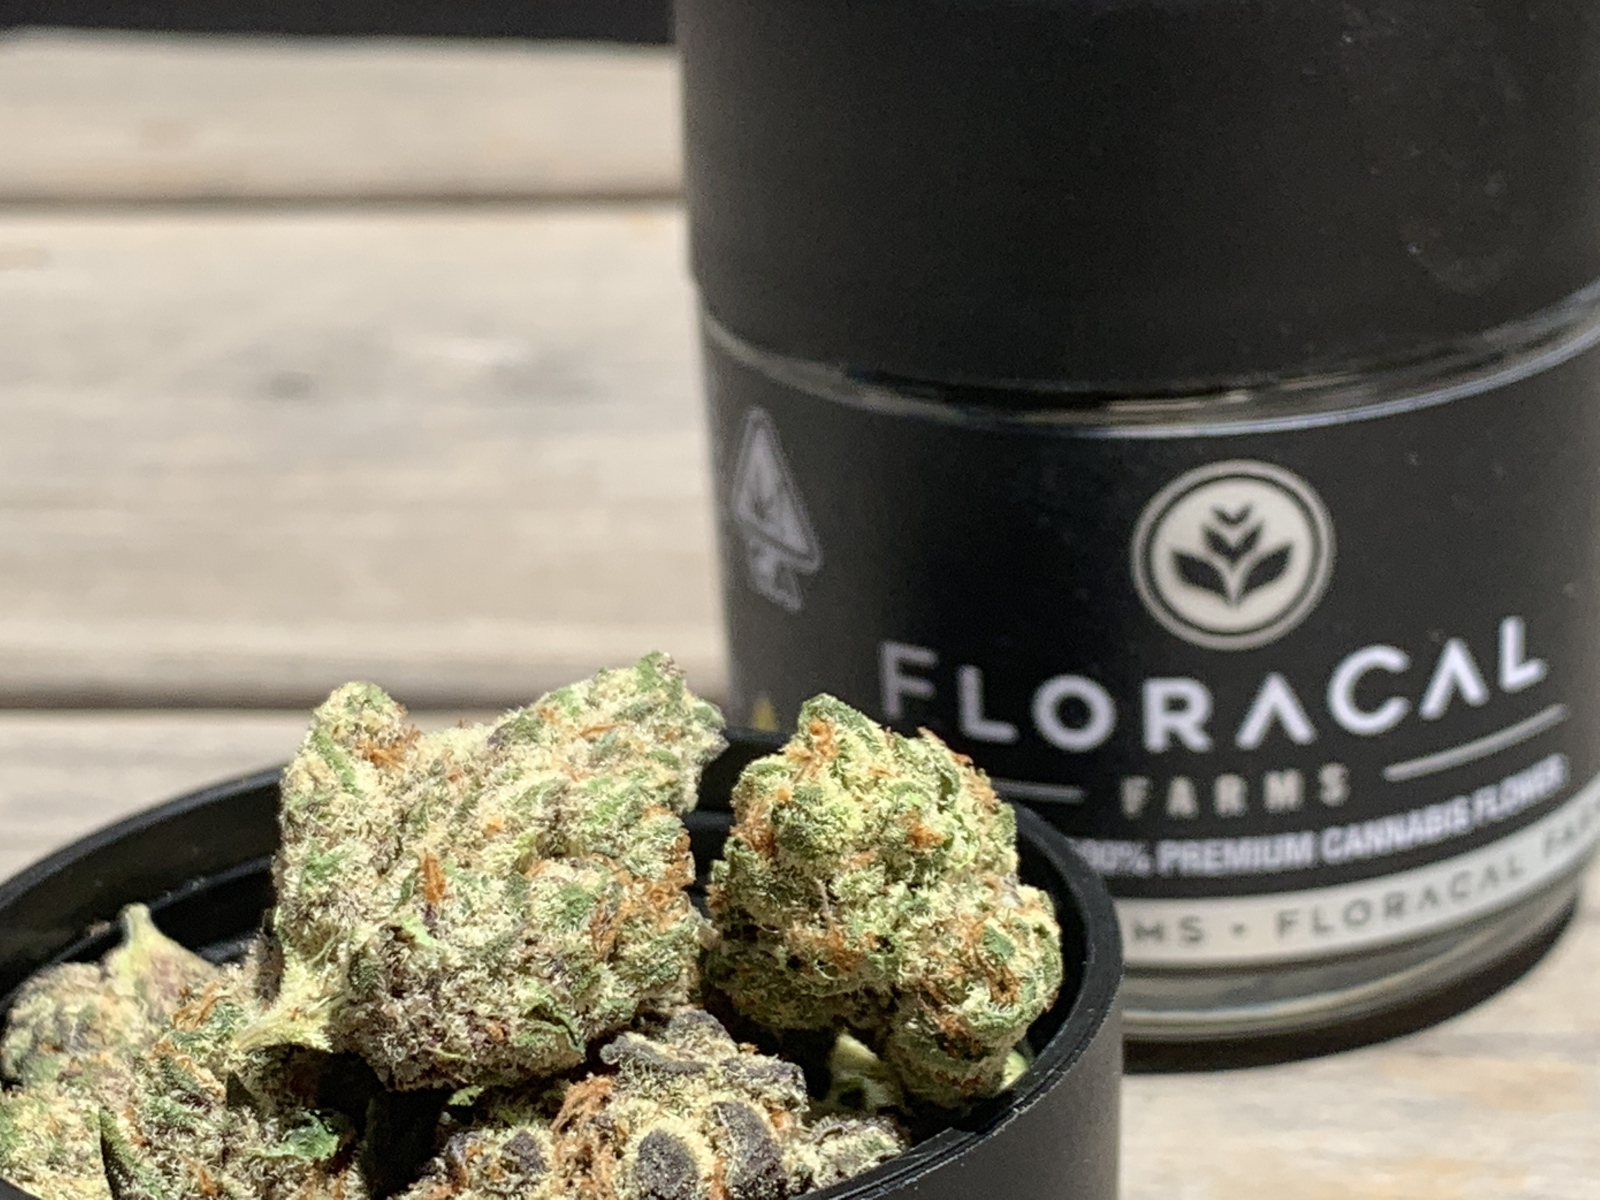 Floracal dosido packaged eighth